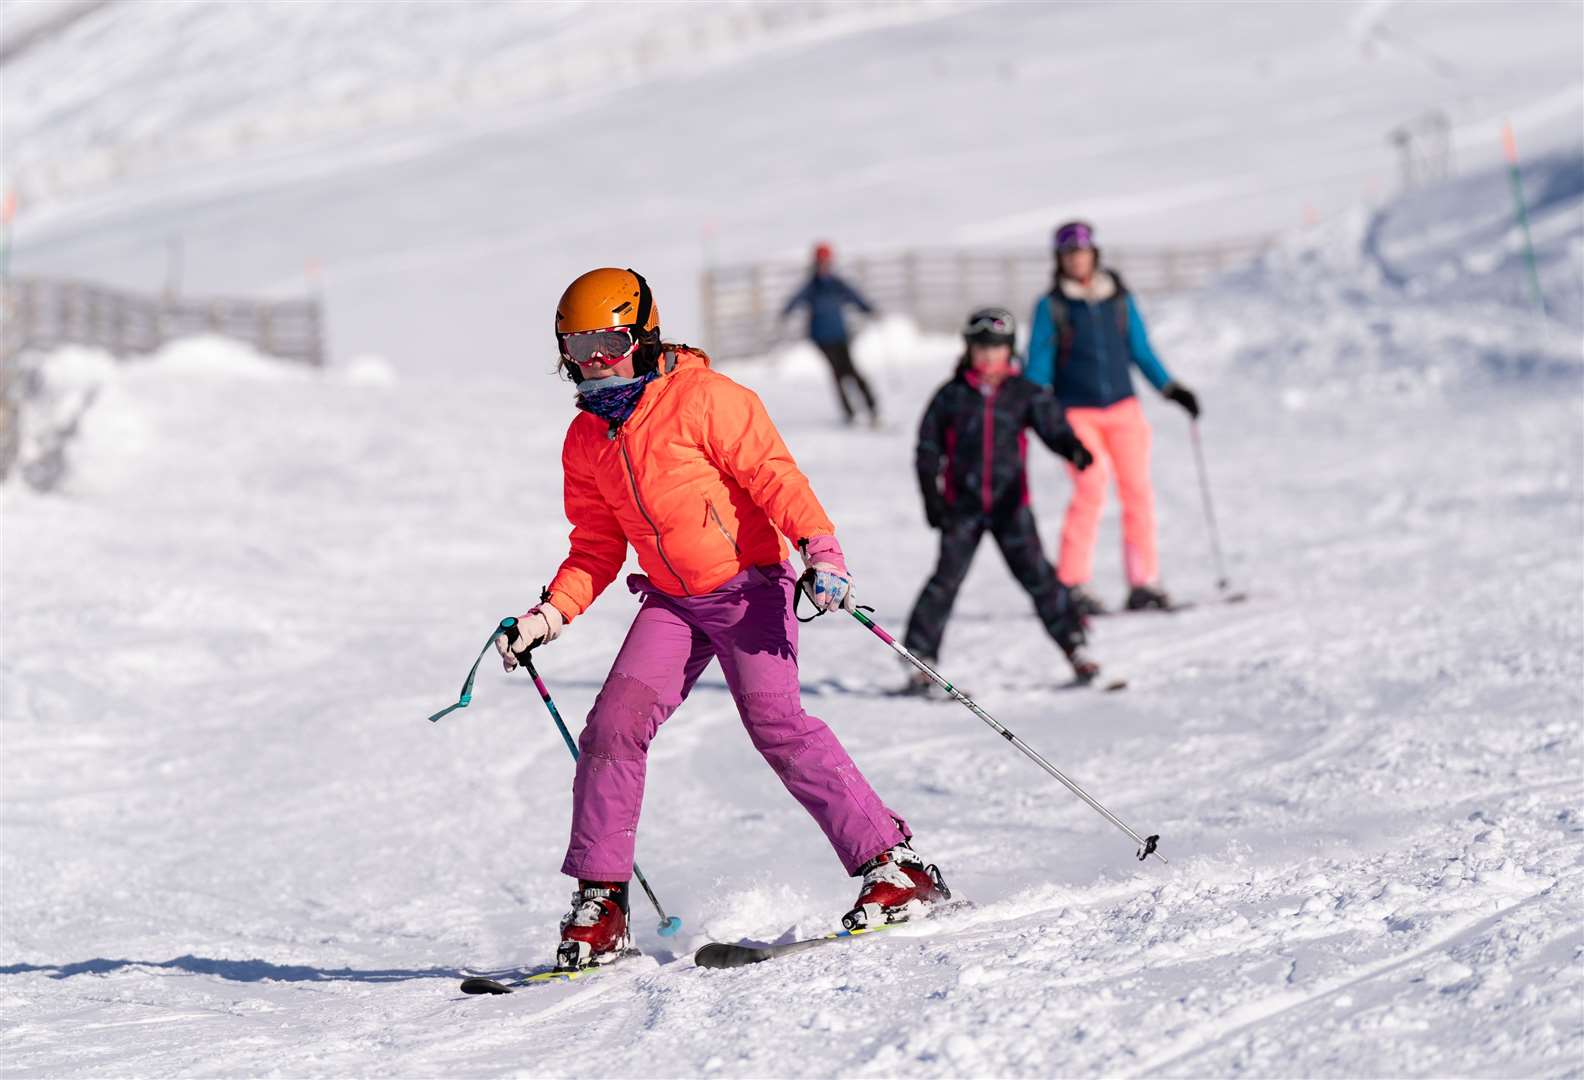 Enjoying some Easter at Cairngorm Mountain. Picture: Paul Masson.